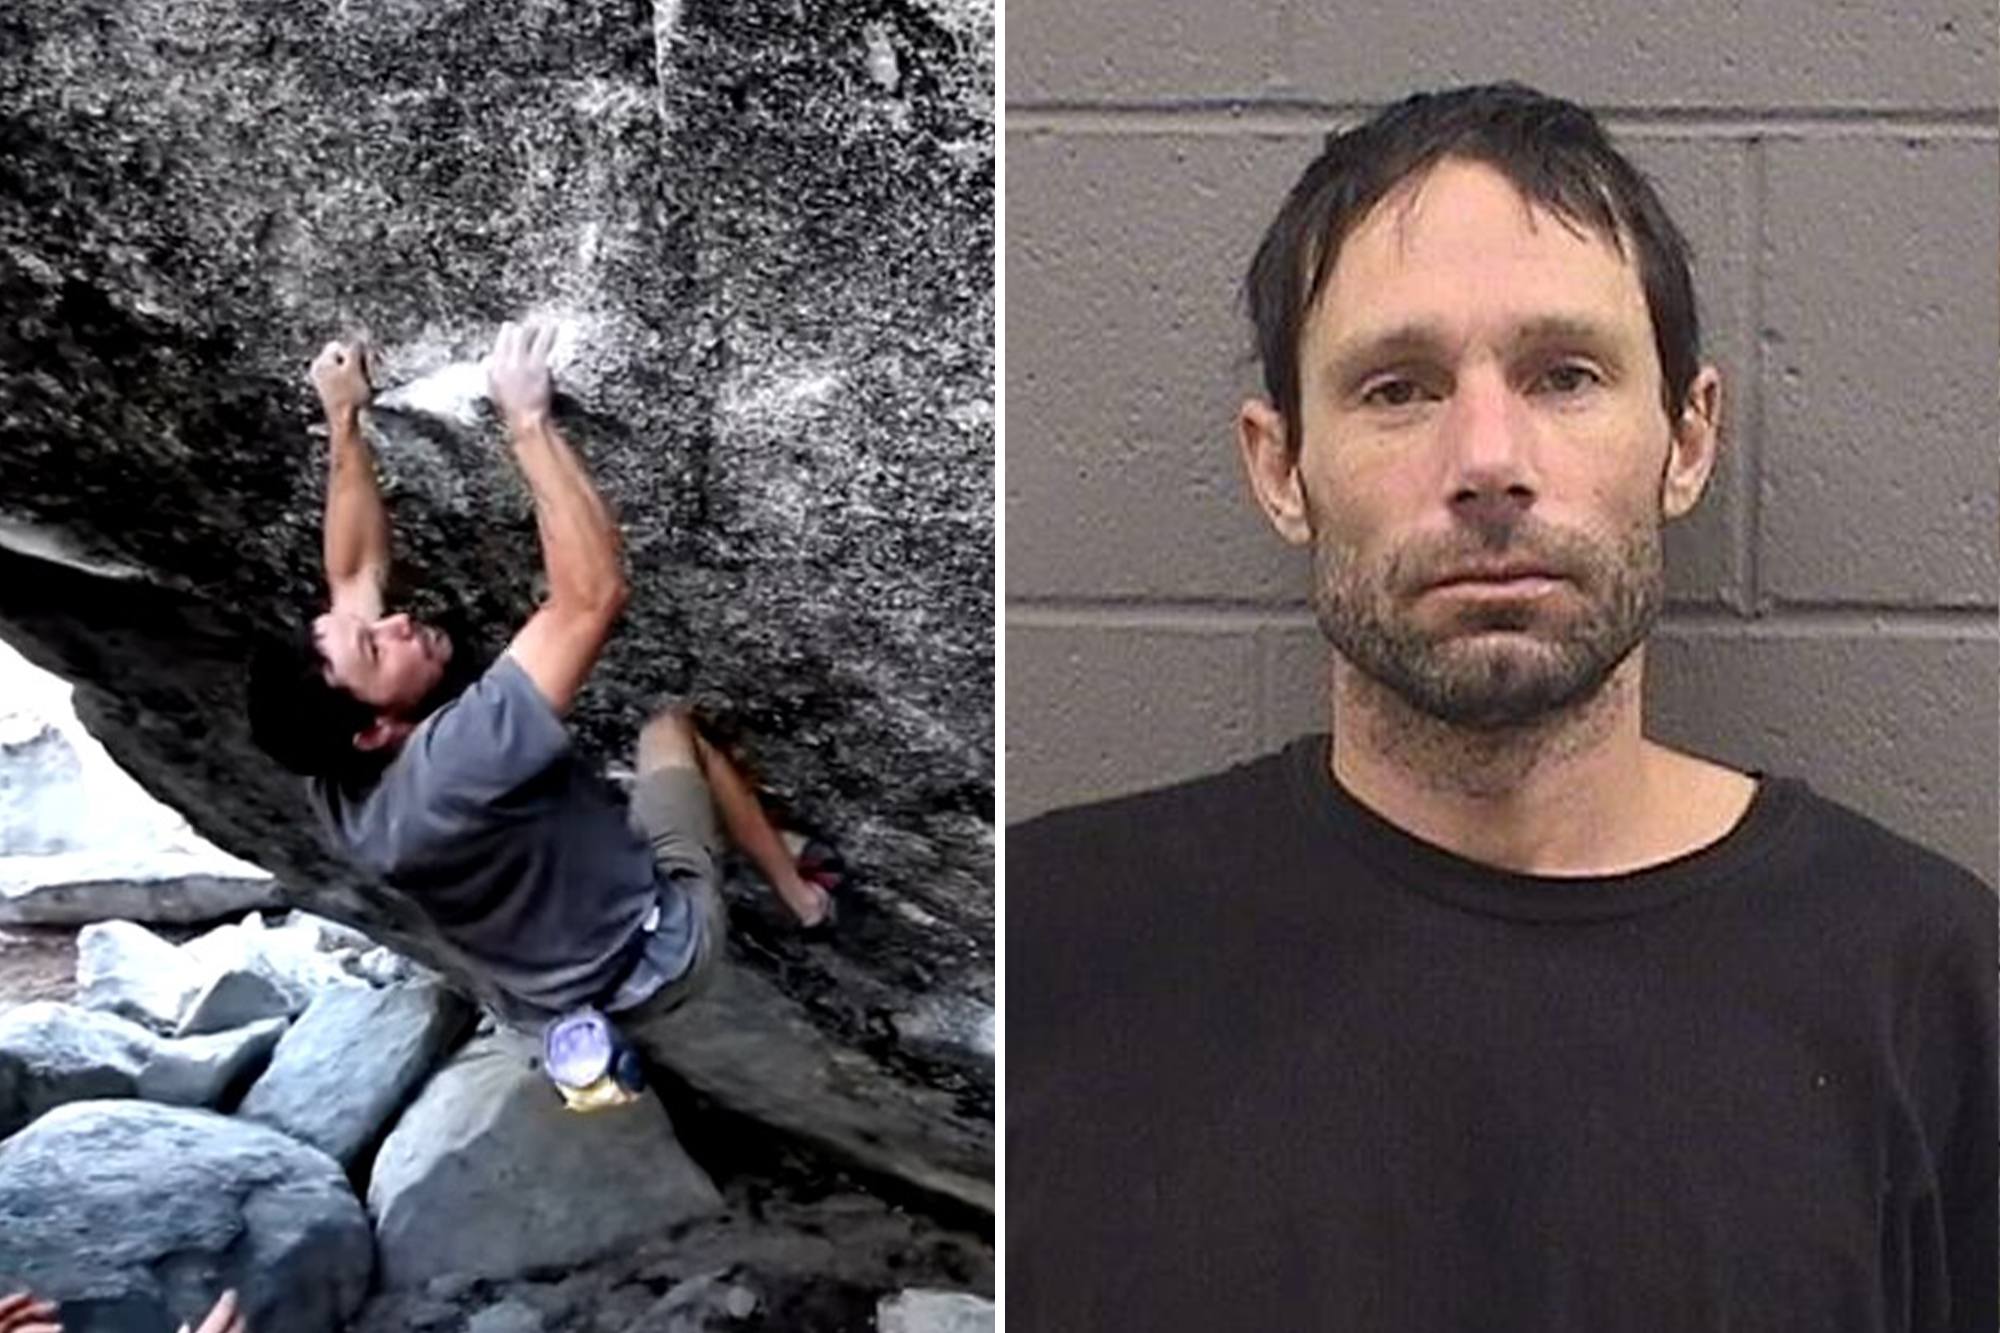 Pro rock climber Charles Barrett gets life in prison for sexual assaults in Yosemite National park